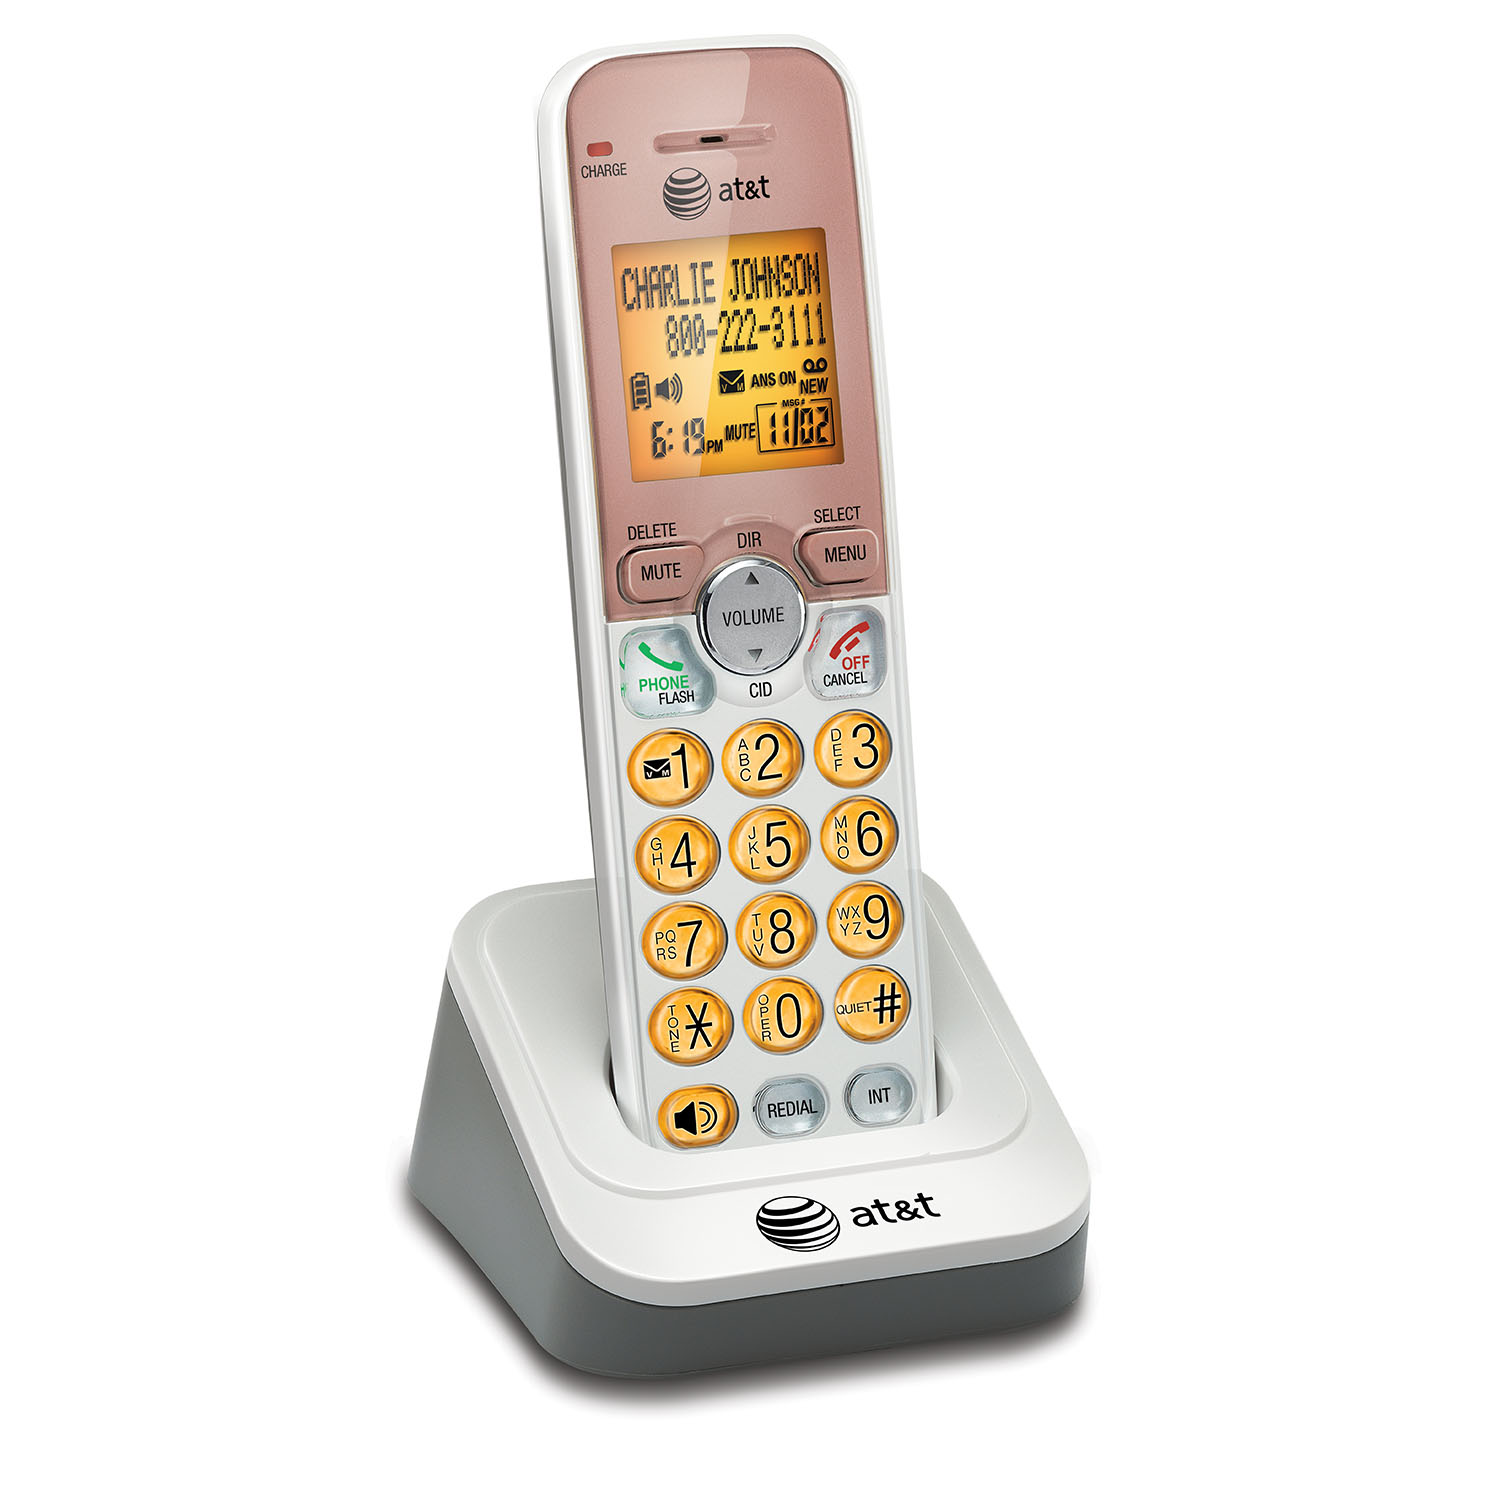 5 handset cordless answering system with caller ID/call waiting - view 8